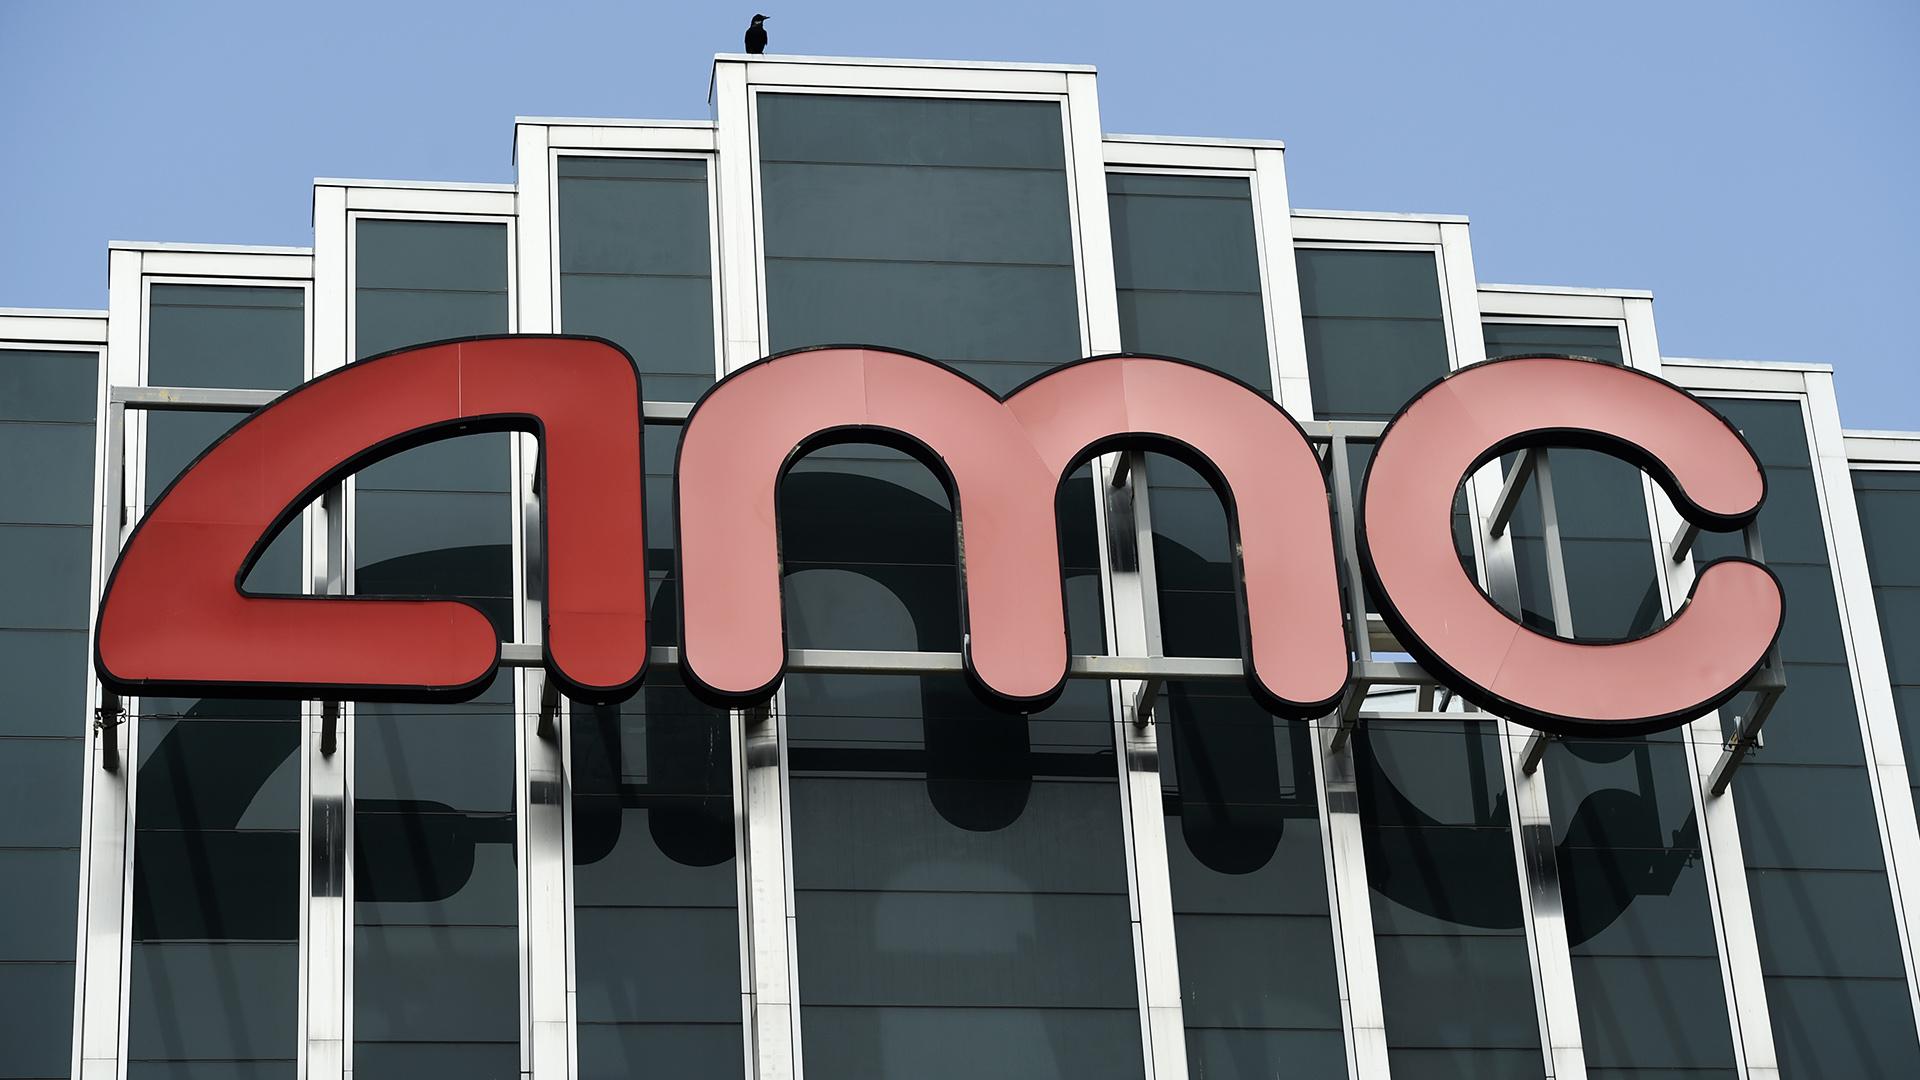 In this April 29, 2020 file photo, the AMC sign appears at AMC Burbank 16 movie theater complex in Burbank, Calif. (AP Photo / Chris Pizzello, File)